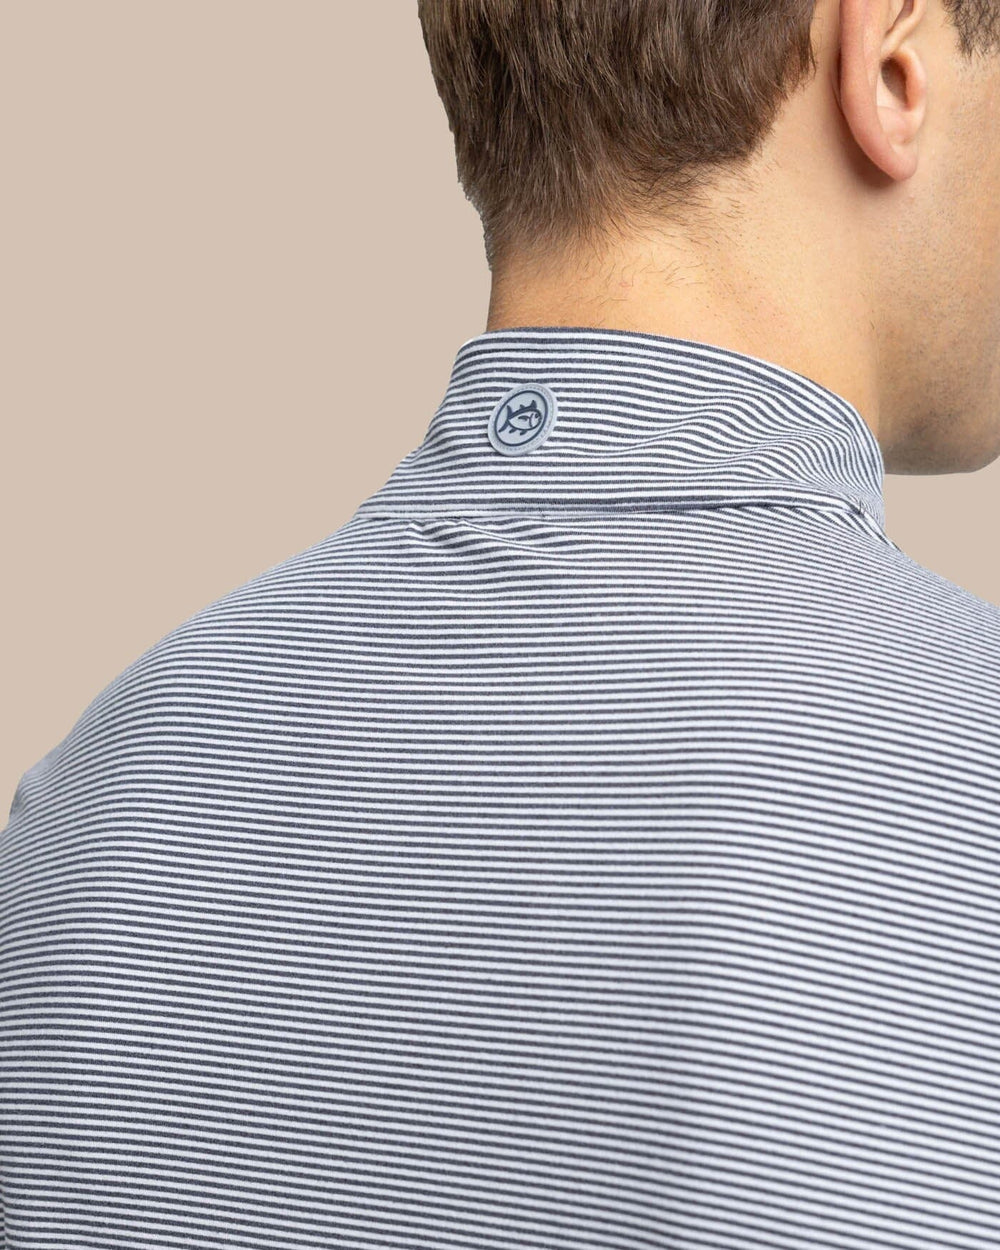 The yoke view of the Southern Tide Cruiser Micro-Stripe Heather Quarter Zip by Southern Tide - Heather Black